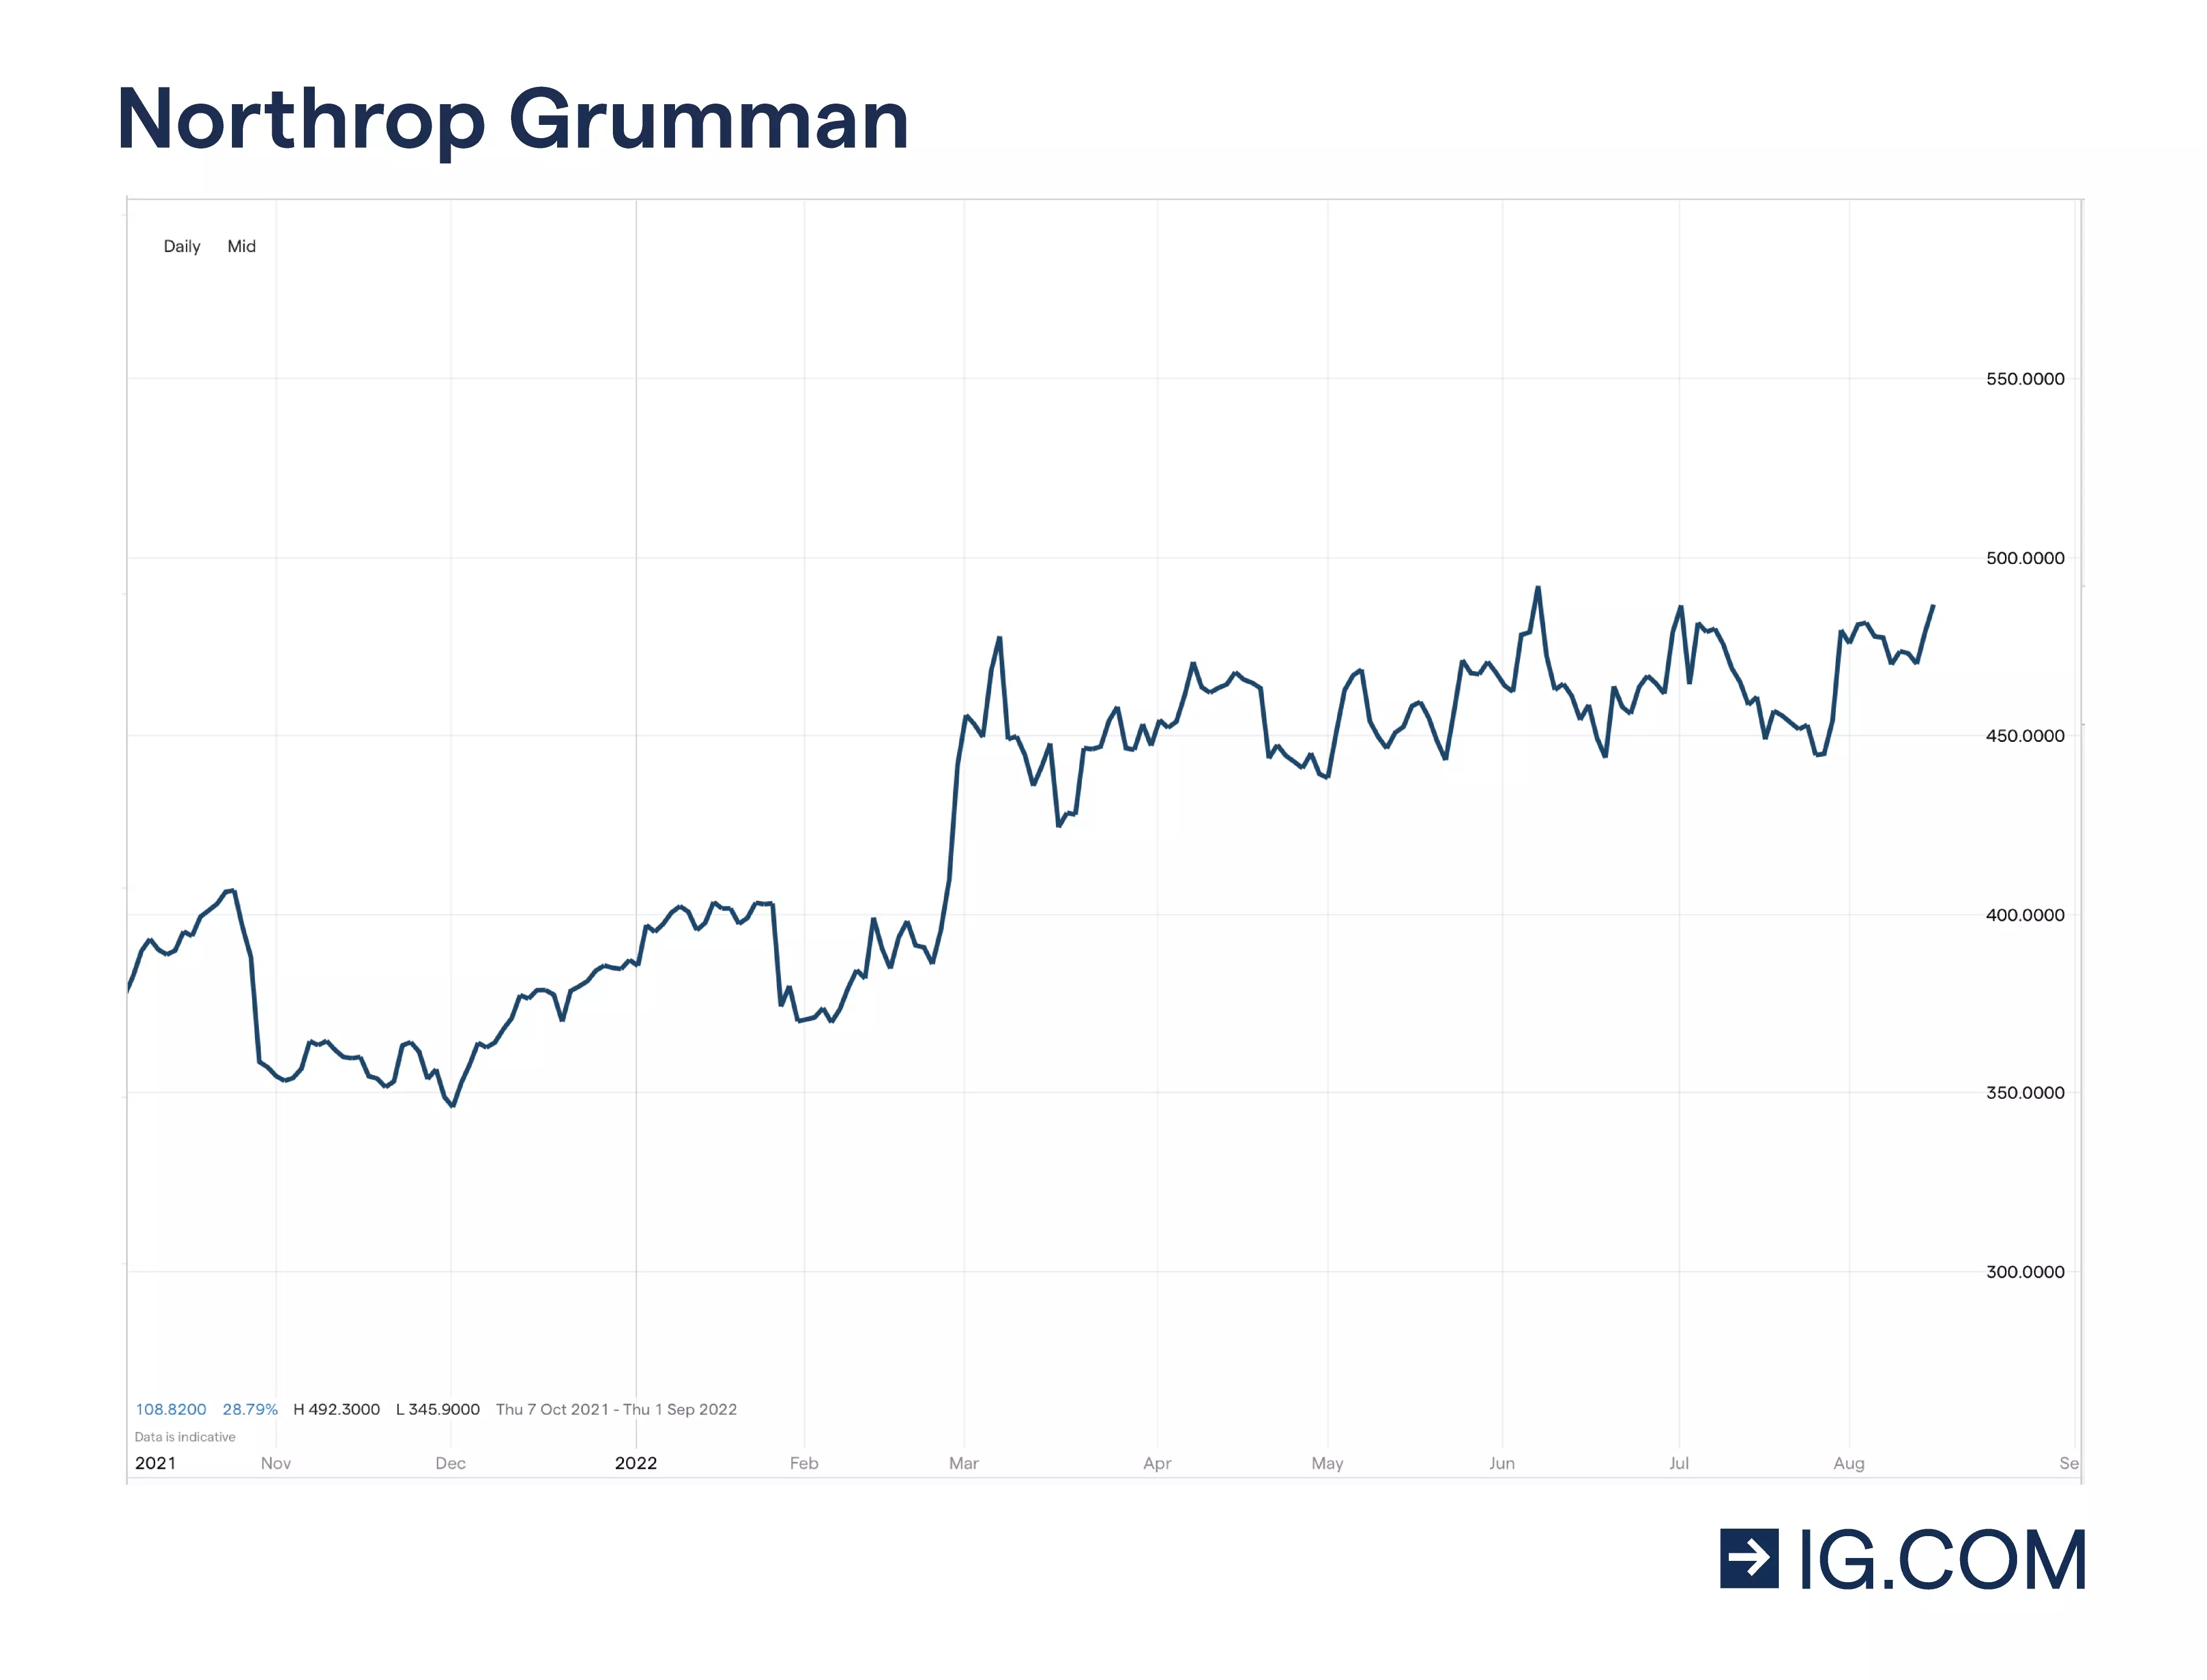 Graph indicating different price levels of Northrop Grumman stock over a year timeline reaching highs and lows including a low 353.27 in November 21 before peaking at over 490.82 in March 22, the current share price is 456.16 in May 2022